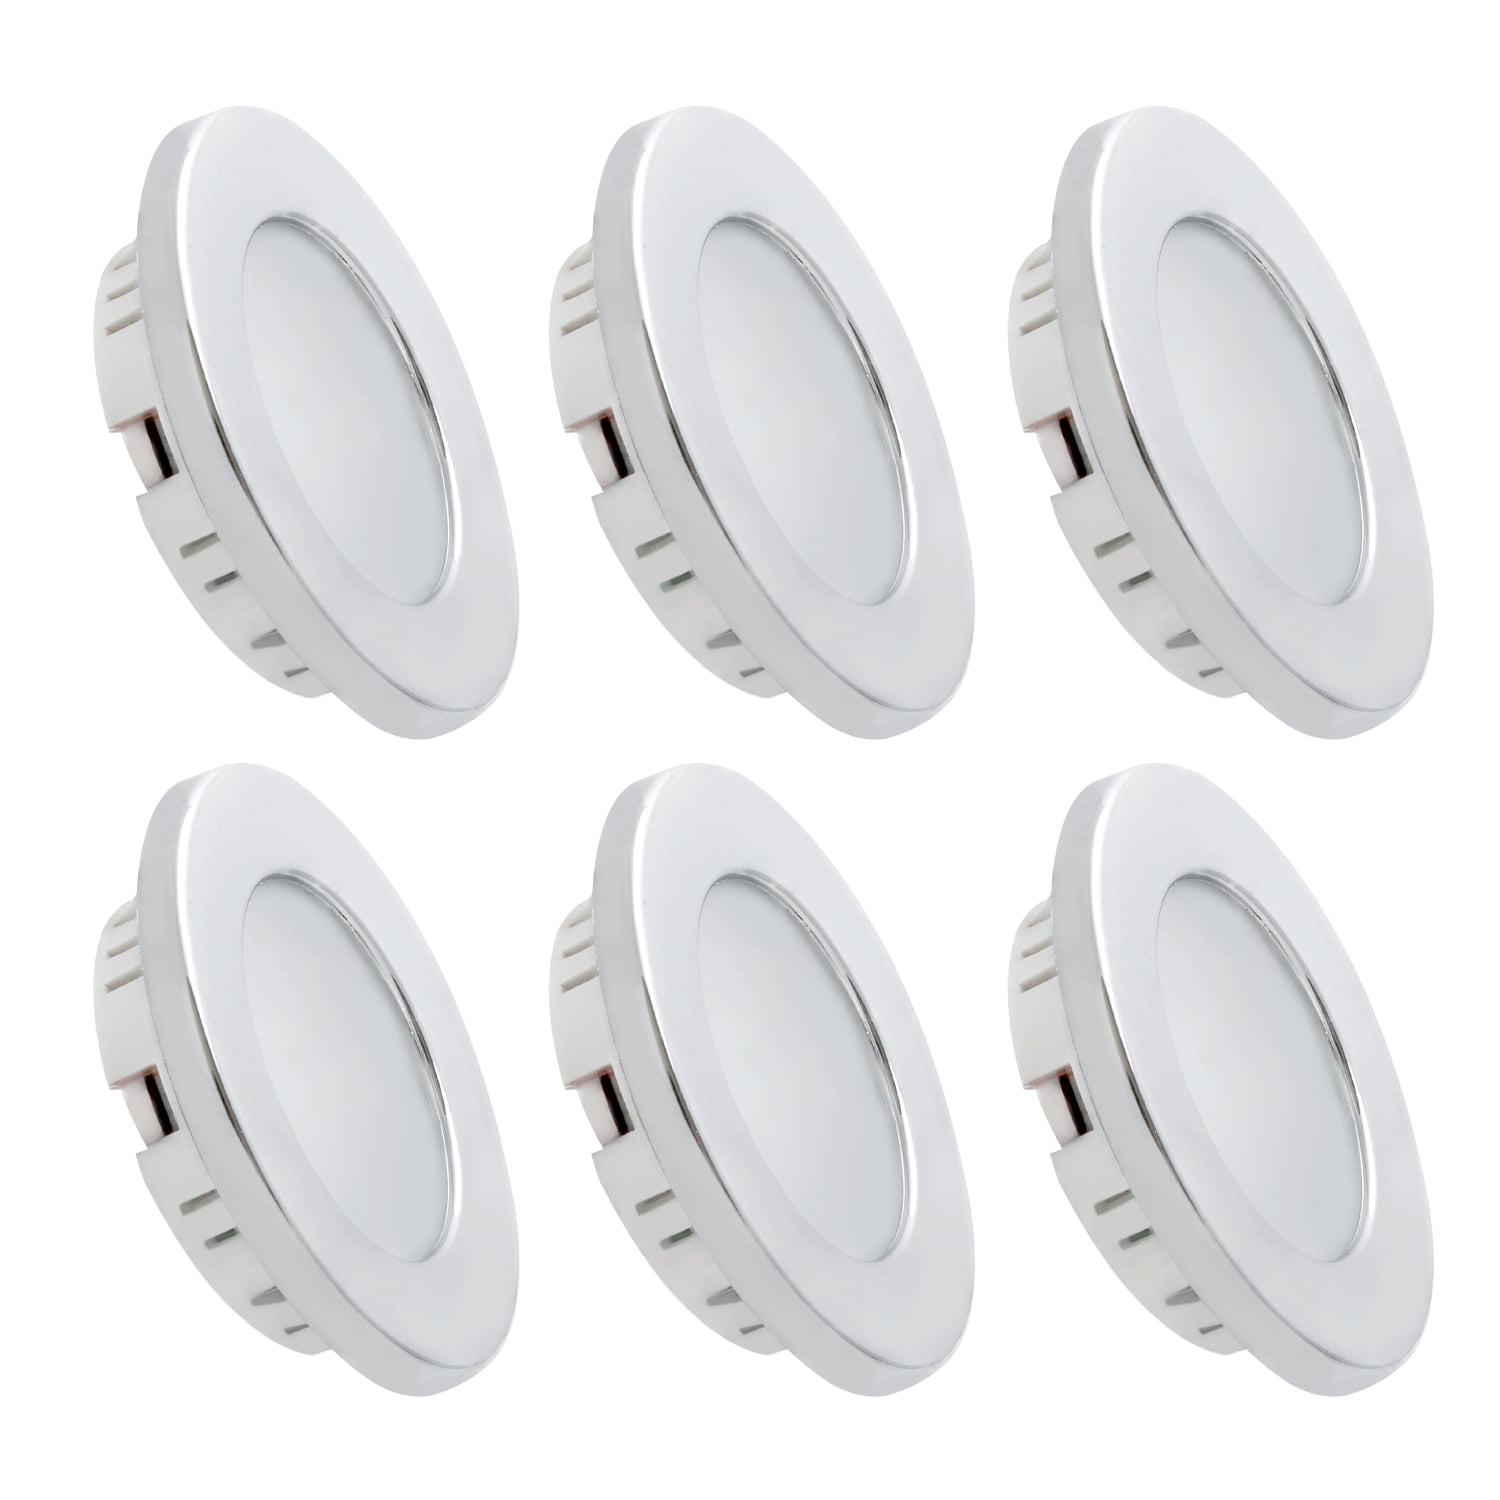 Silver Shell Recessed Downlight Pack of 6 Dream Lighting 2W LED Ceiling Light 